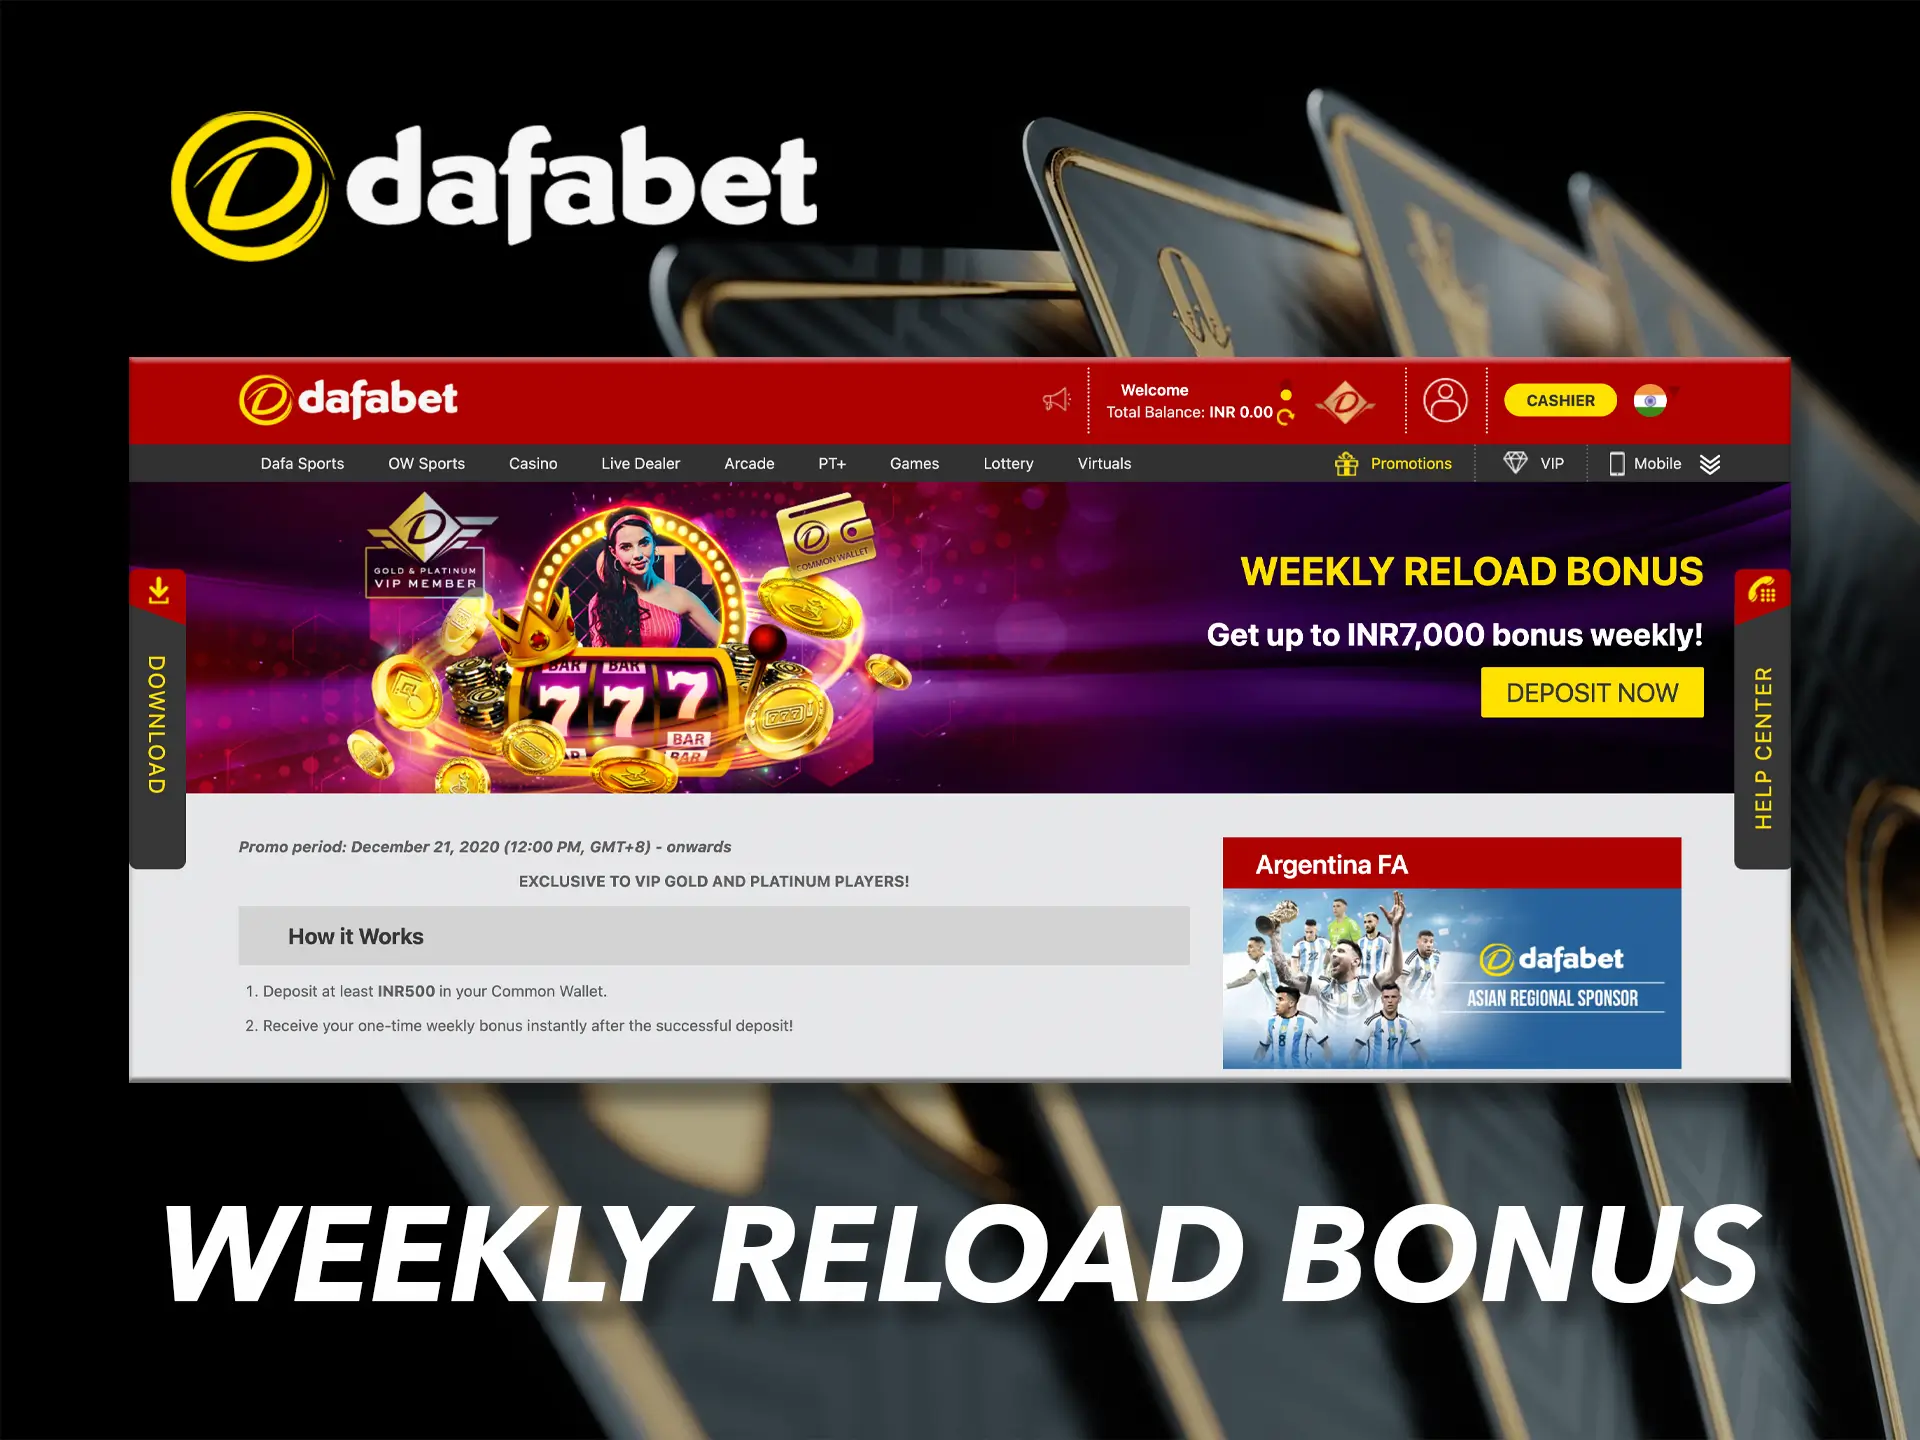 Get an exclusive gift from Dafabet for the most ardent sports and casino fans.